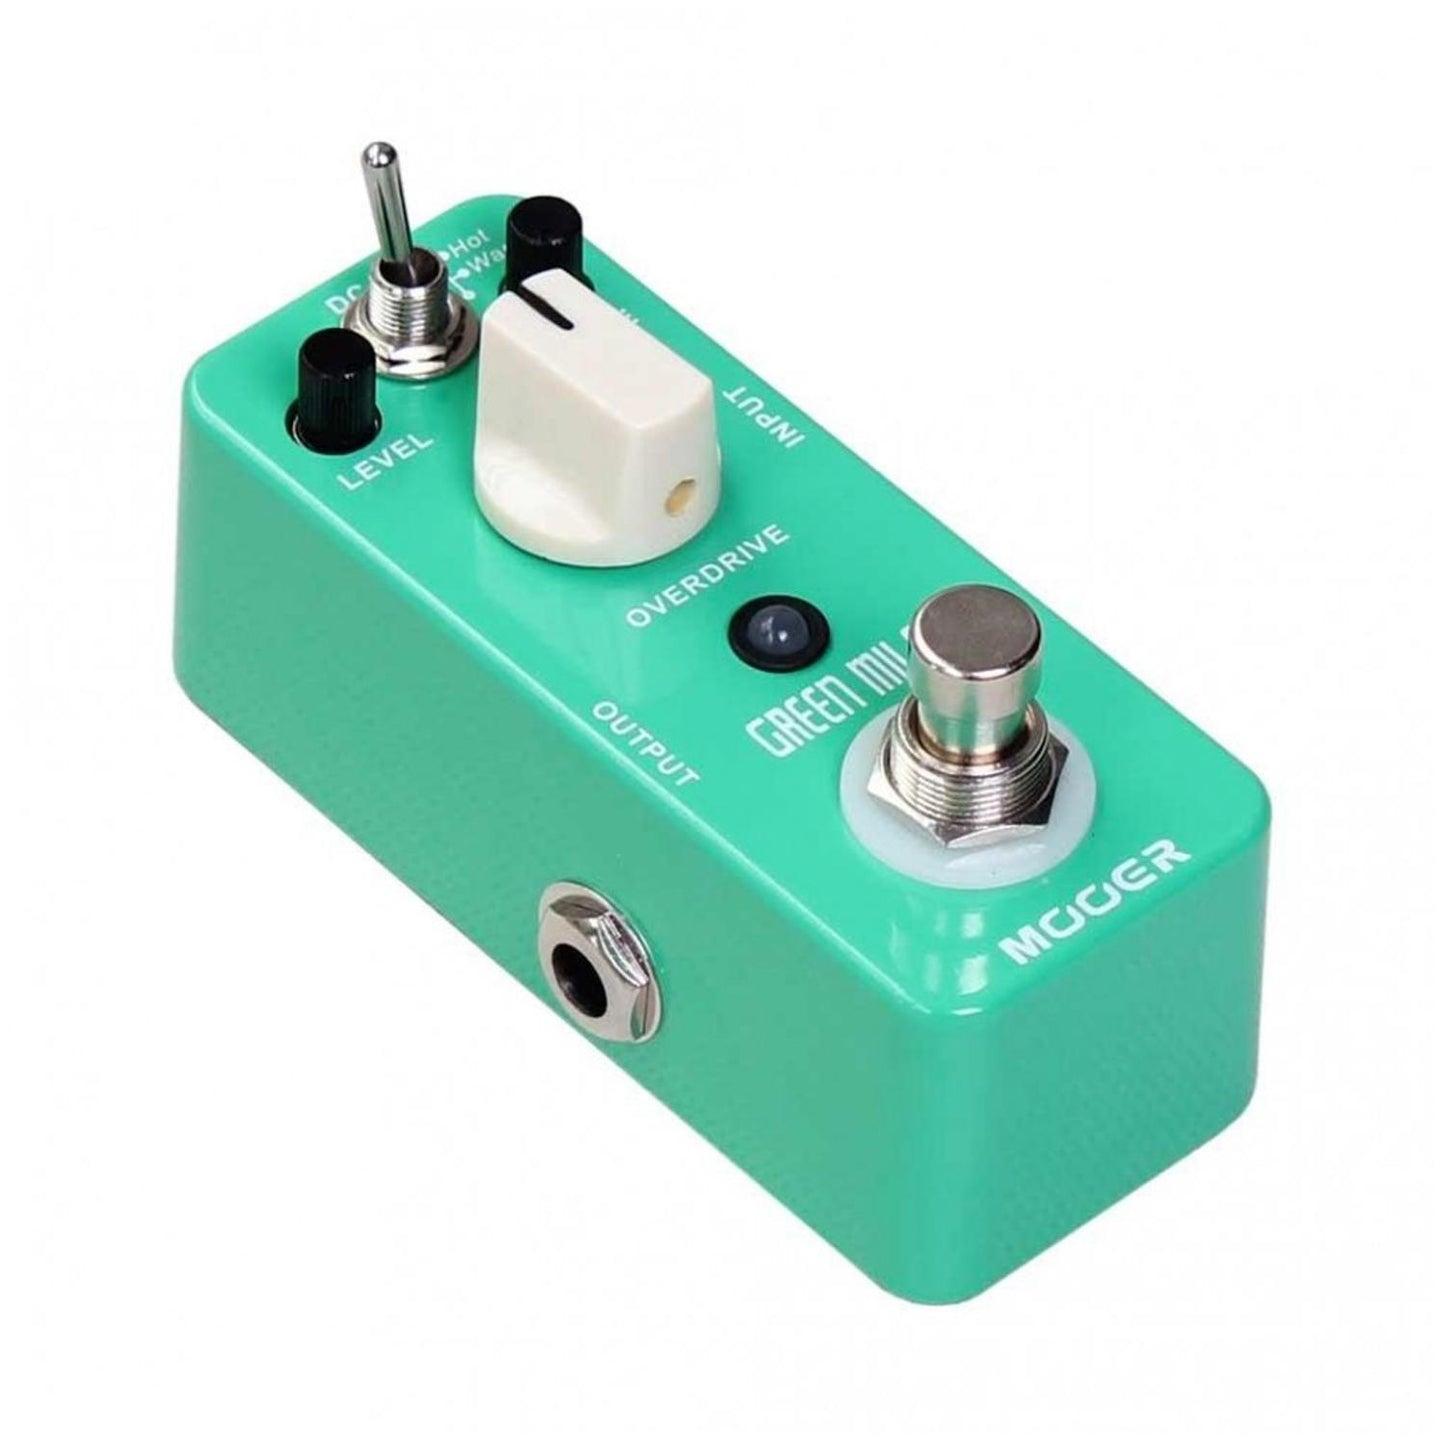 Pedal Overdrive GREEN MILE MOOER